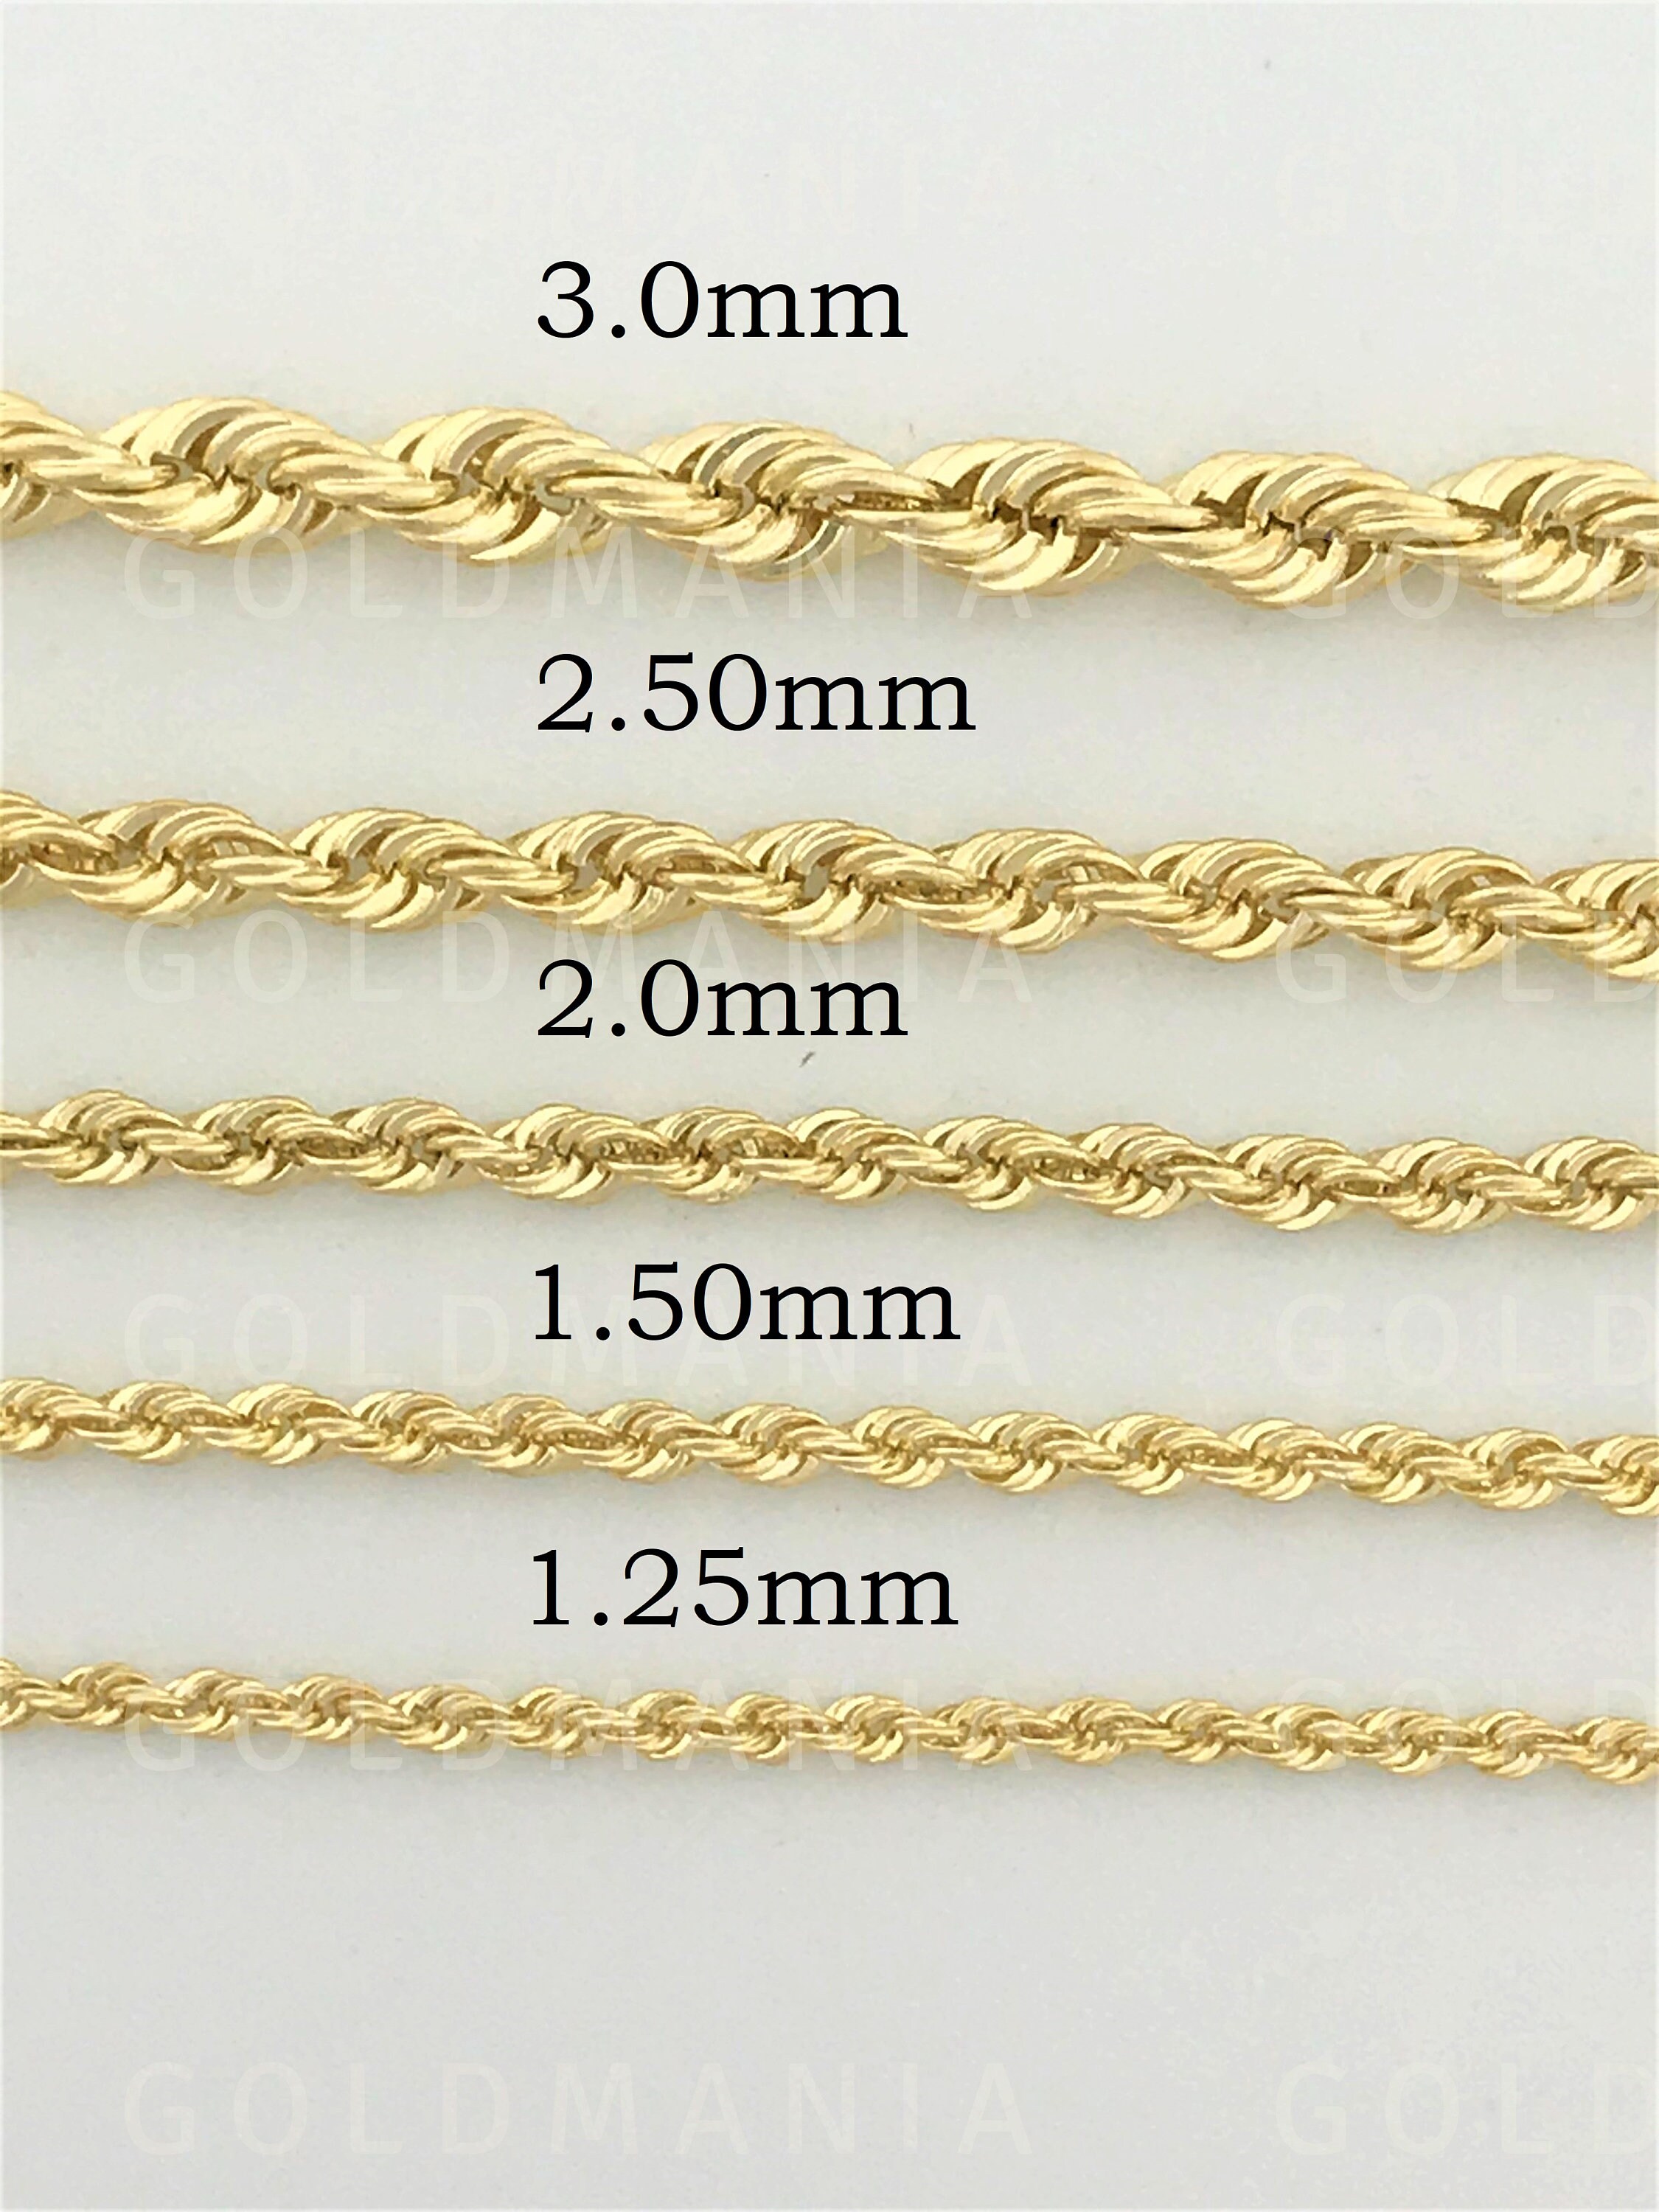 14K Gold Solid Rope Chain - 21 inch - 16.9 Grams - 3mm